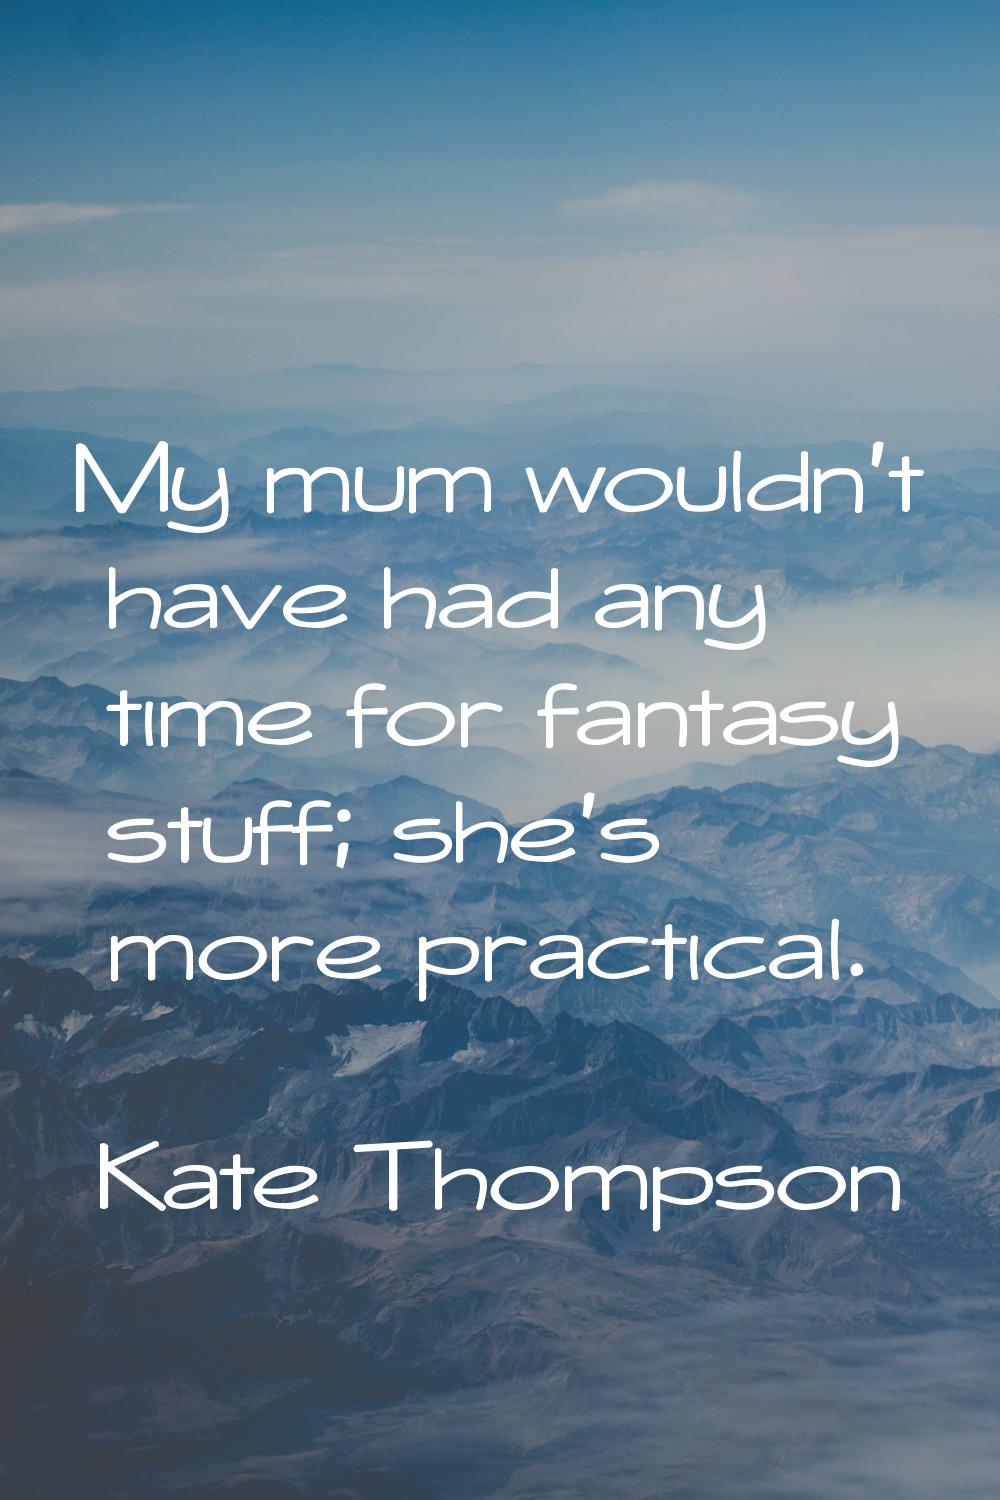 My mum wouldn't have had any time for fantasy stuff; she's more practical.